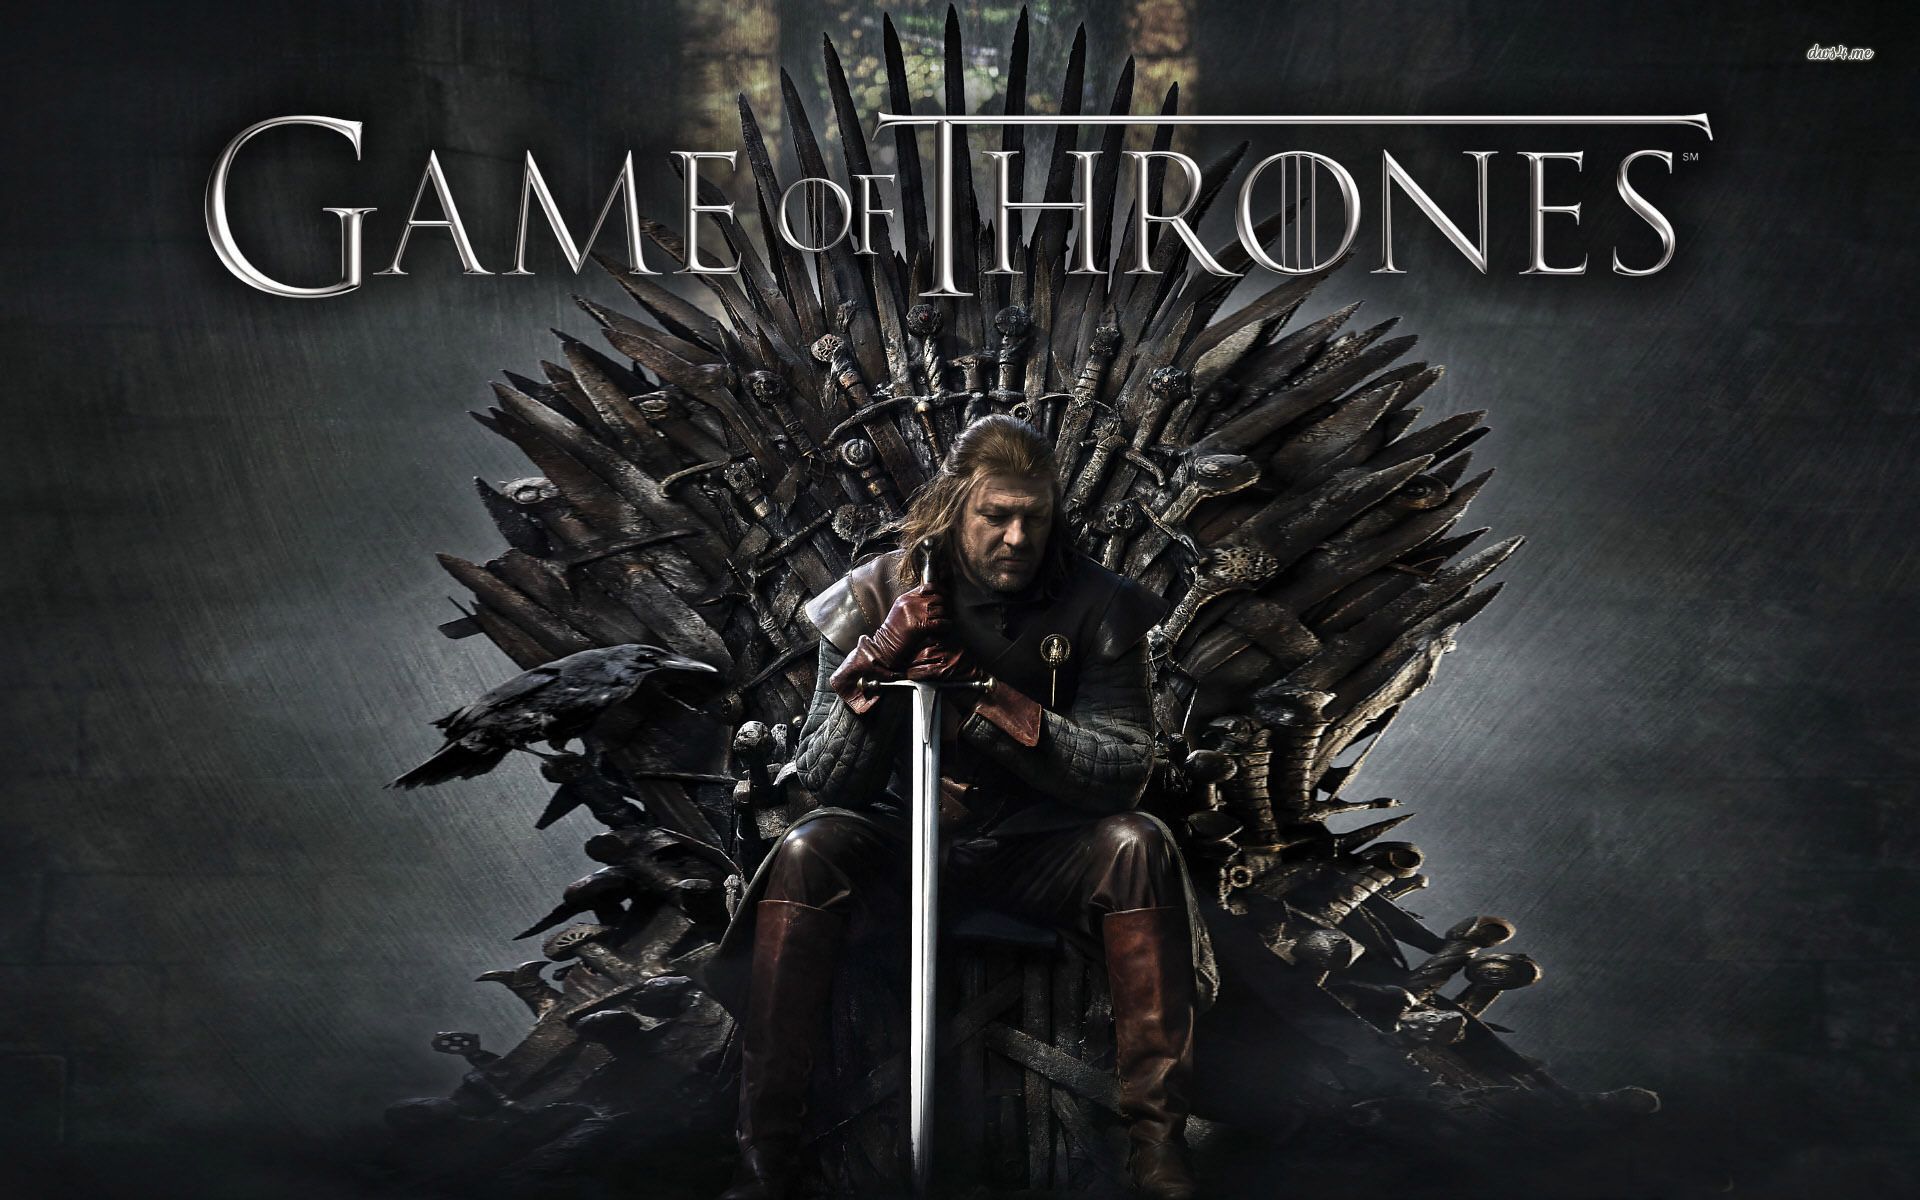 game of thrones tops 2013 s most pirated shows list by torrentfreak image 1